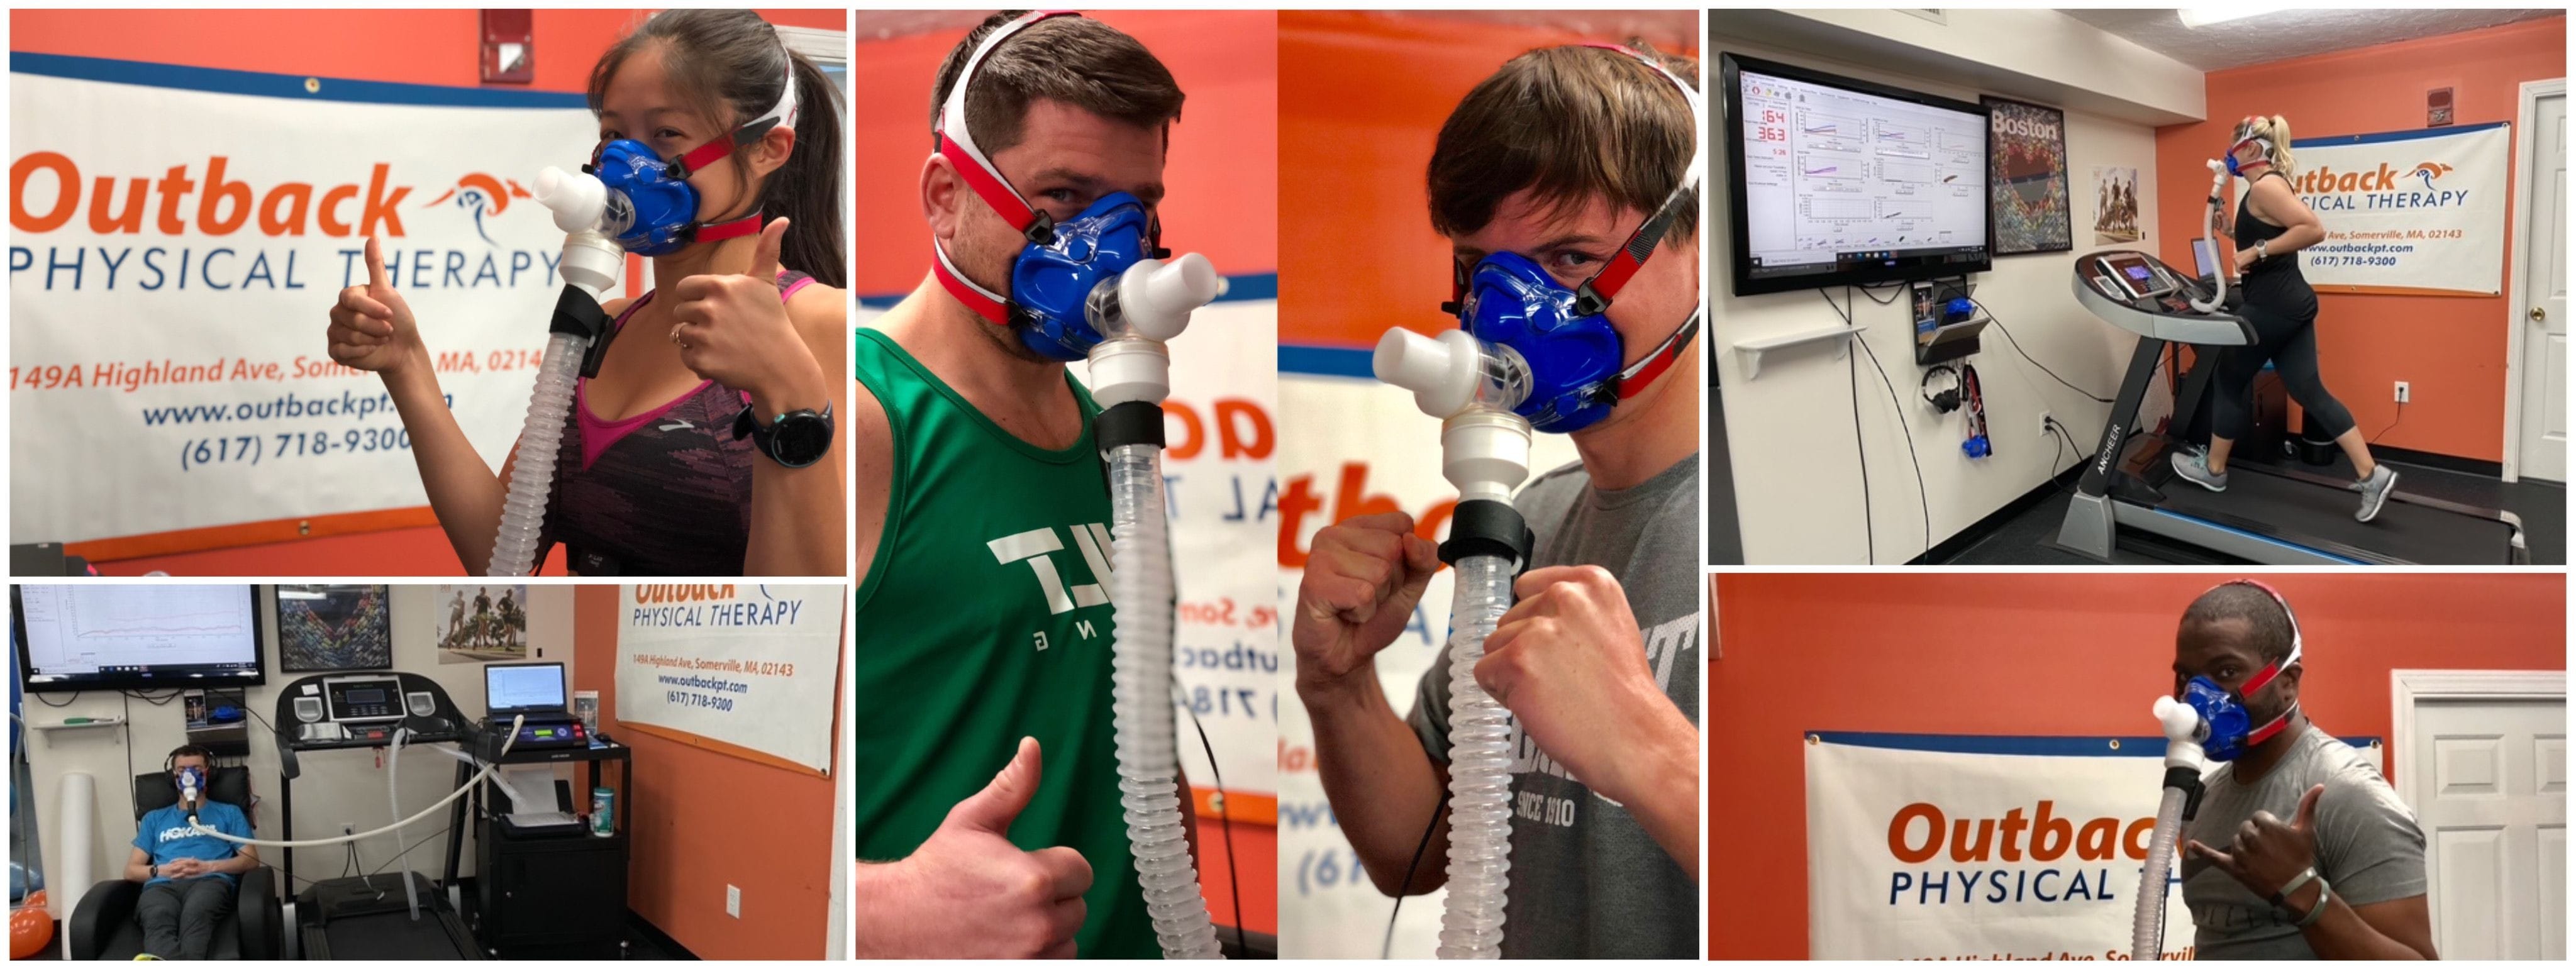 Outback Physical Therapy's VO2 Max Testing in Somerville, MA